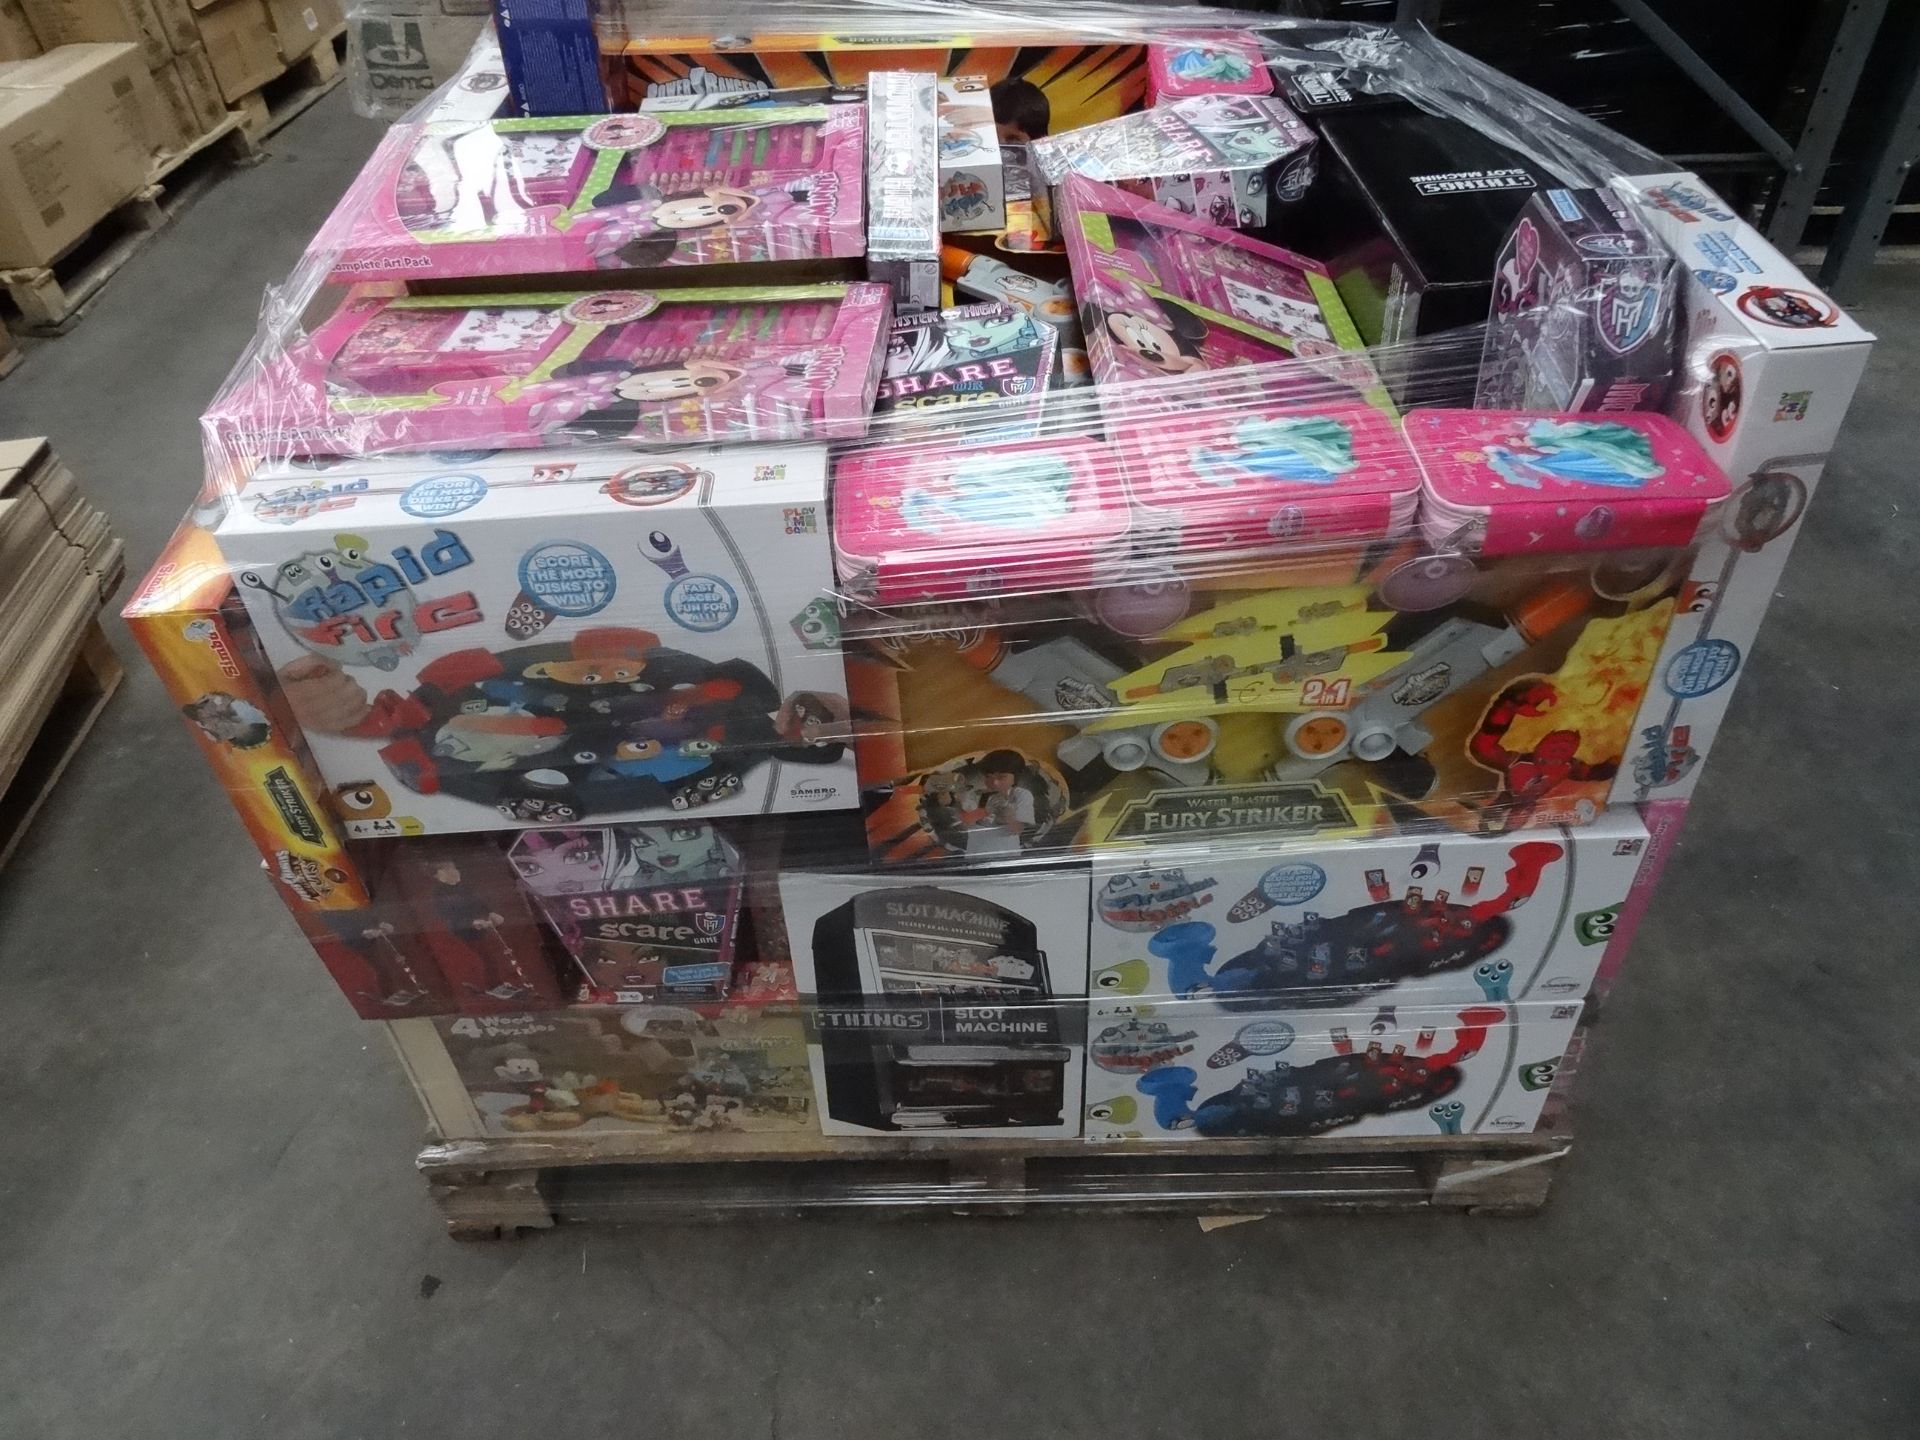 LARGE PALLET (T1) TO CONTAIN 259 ITEMS OF BRAND NEW TOYS & GAMES. TO INCLUDE:
4 x Superman Scooters, - Image 3 of 5